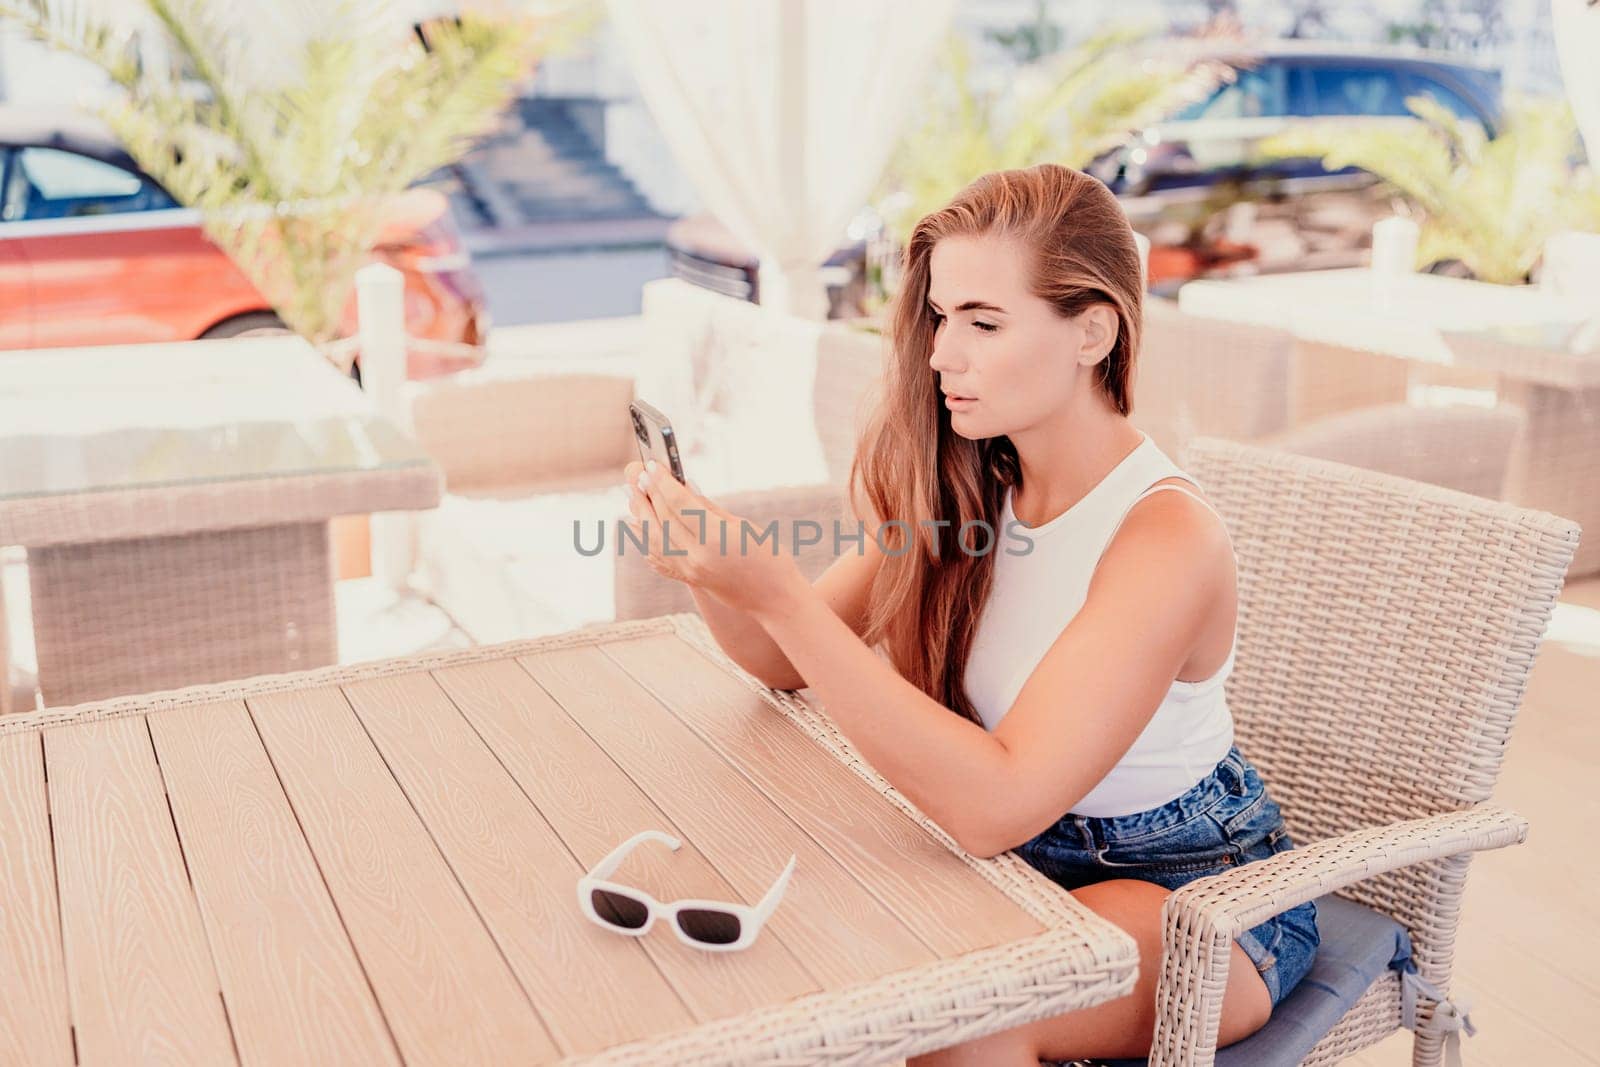 Woman sits in outdoor cafe at wooden table, holds smartphone. Bright sunny day provides natural lighting. Cafe offers relaxed atmosphere for customers to enjoy refreshments. by Matiunina